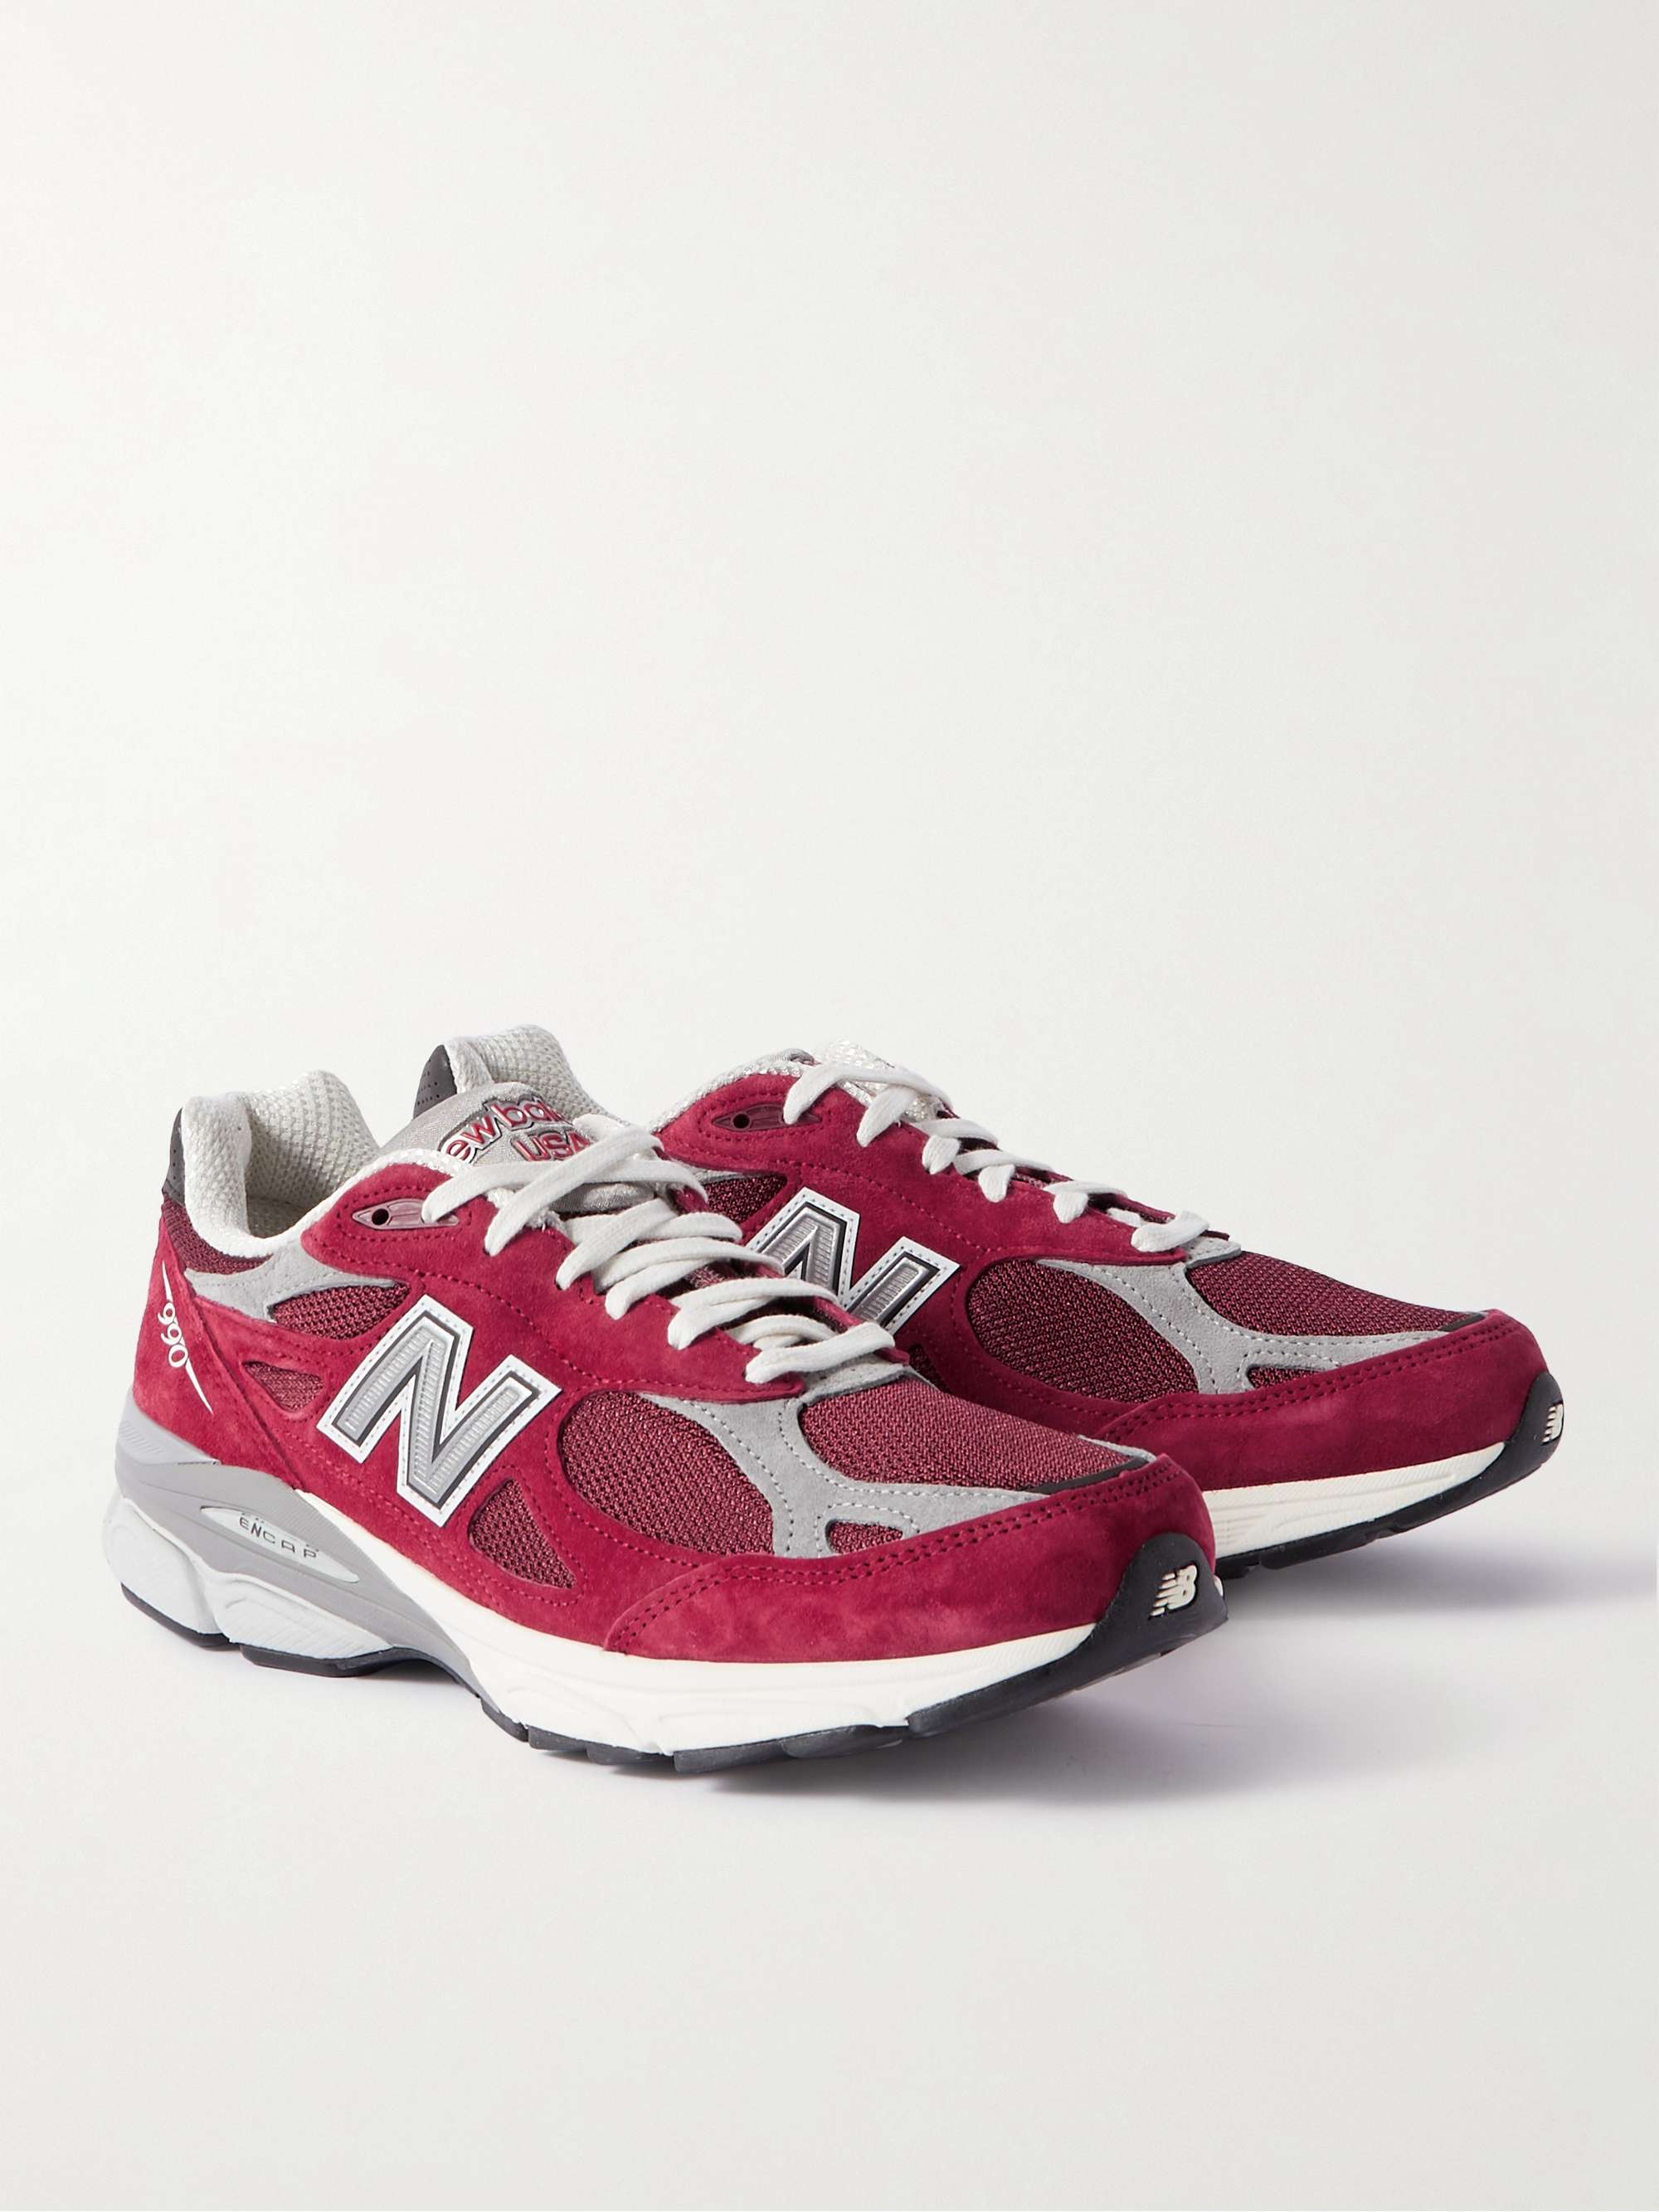 NEW BALANCE 990v3 Leather-Trimmed Suede and Mesh Sneakers